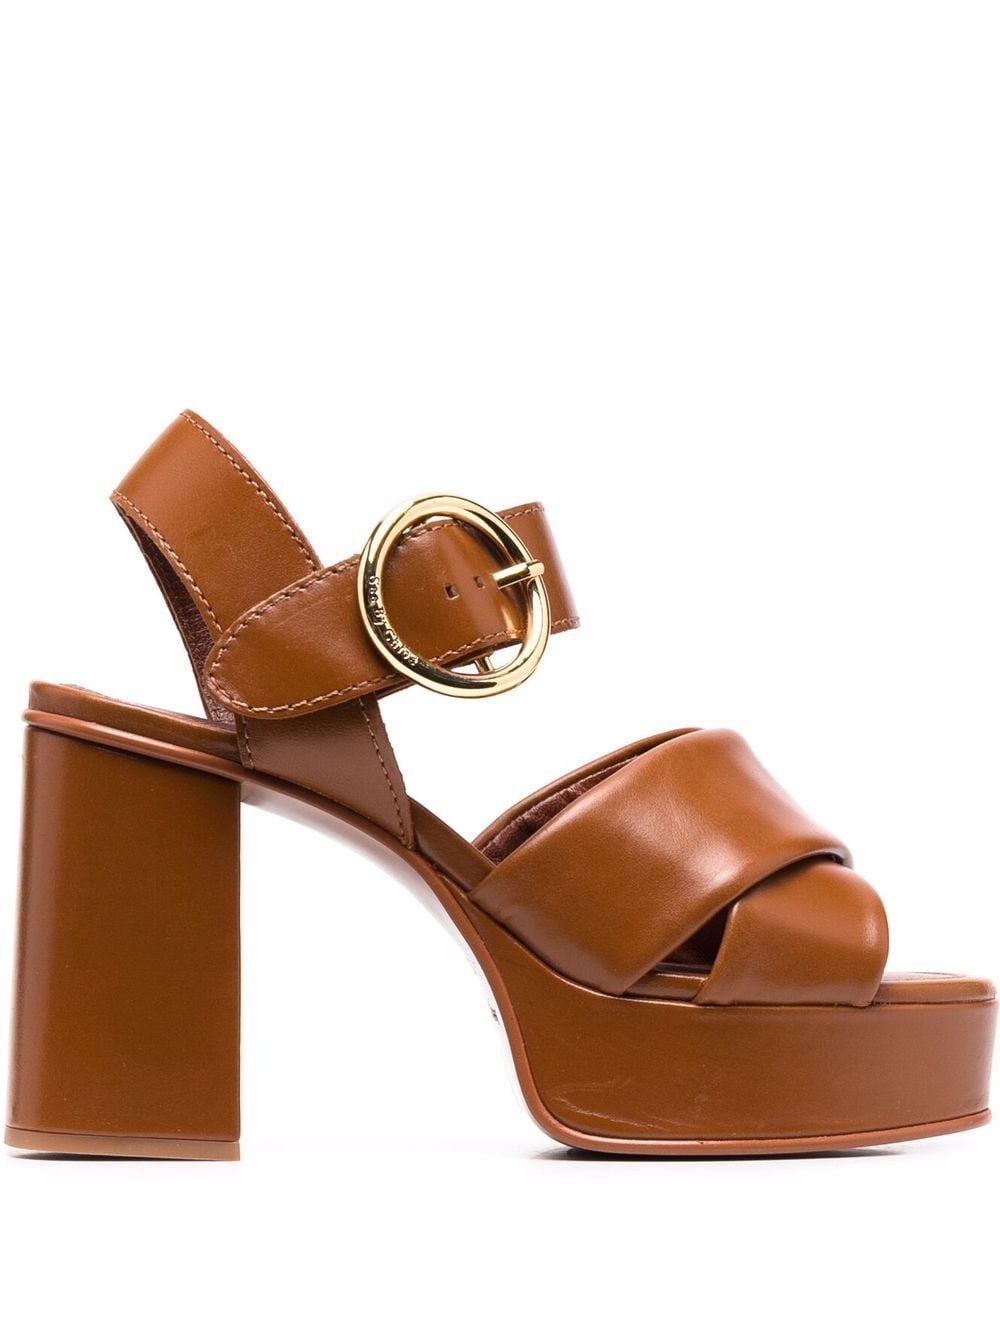 See by Chloé 105mm Lyna leather sandals - Brown von See by Chloé